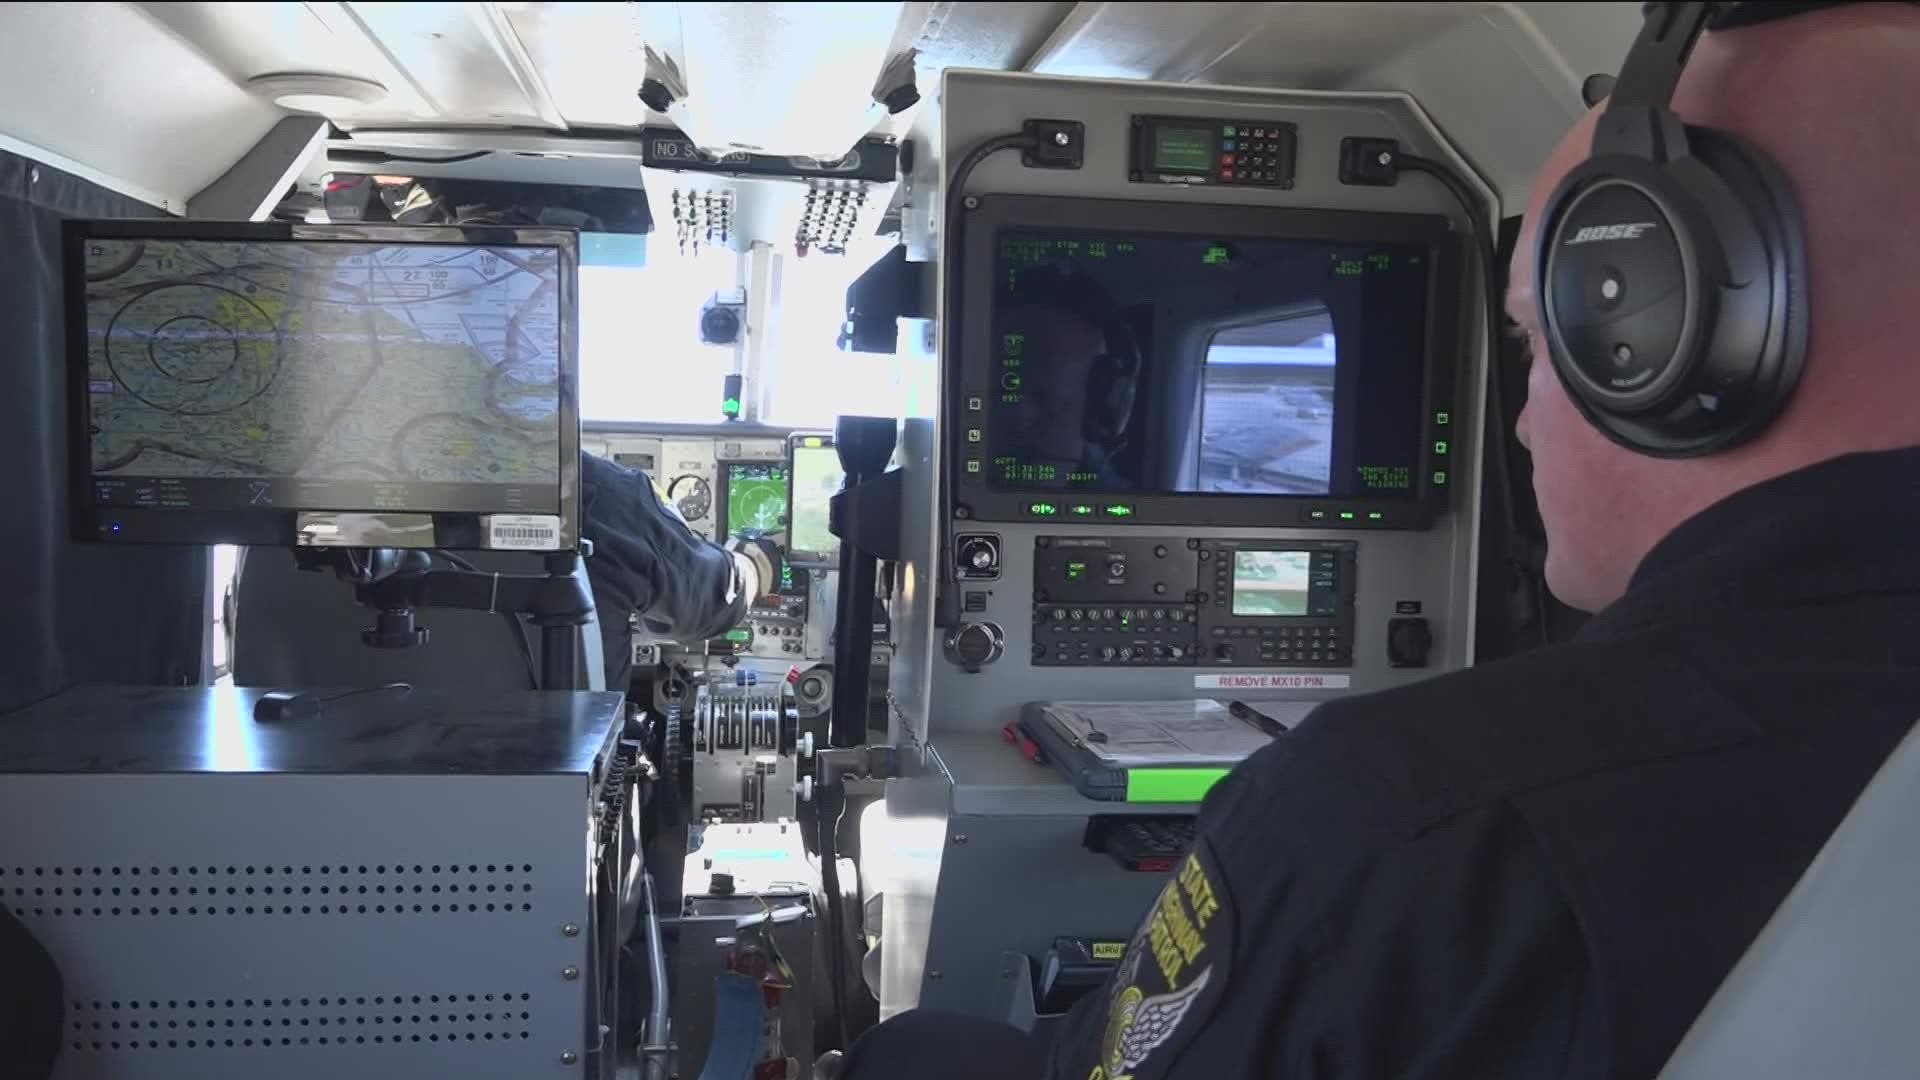 Ohio State Highway Patrol has a new, high-tech way of patroling the ground from the skies. It's a leap forward from traditional air patrols and more cost-effective.